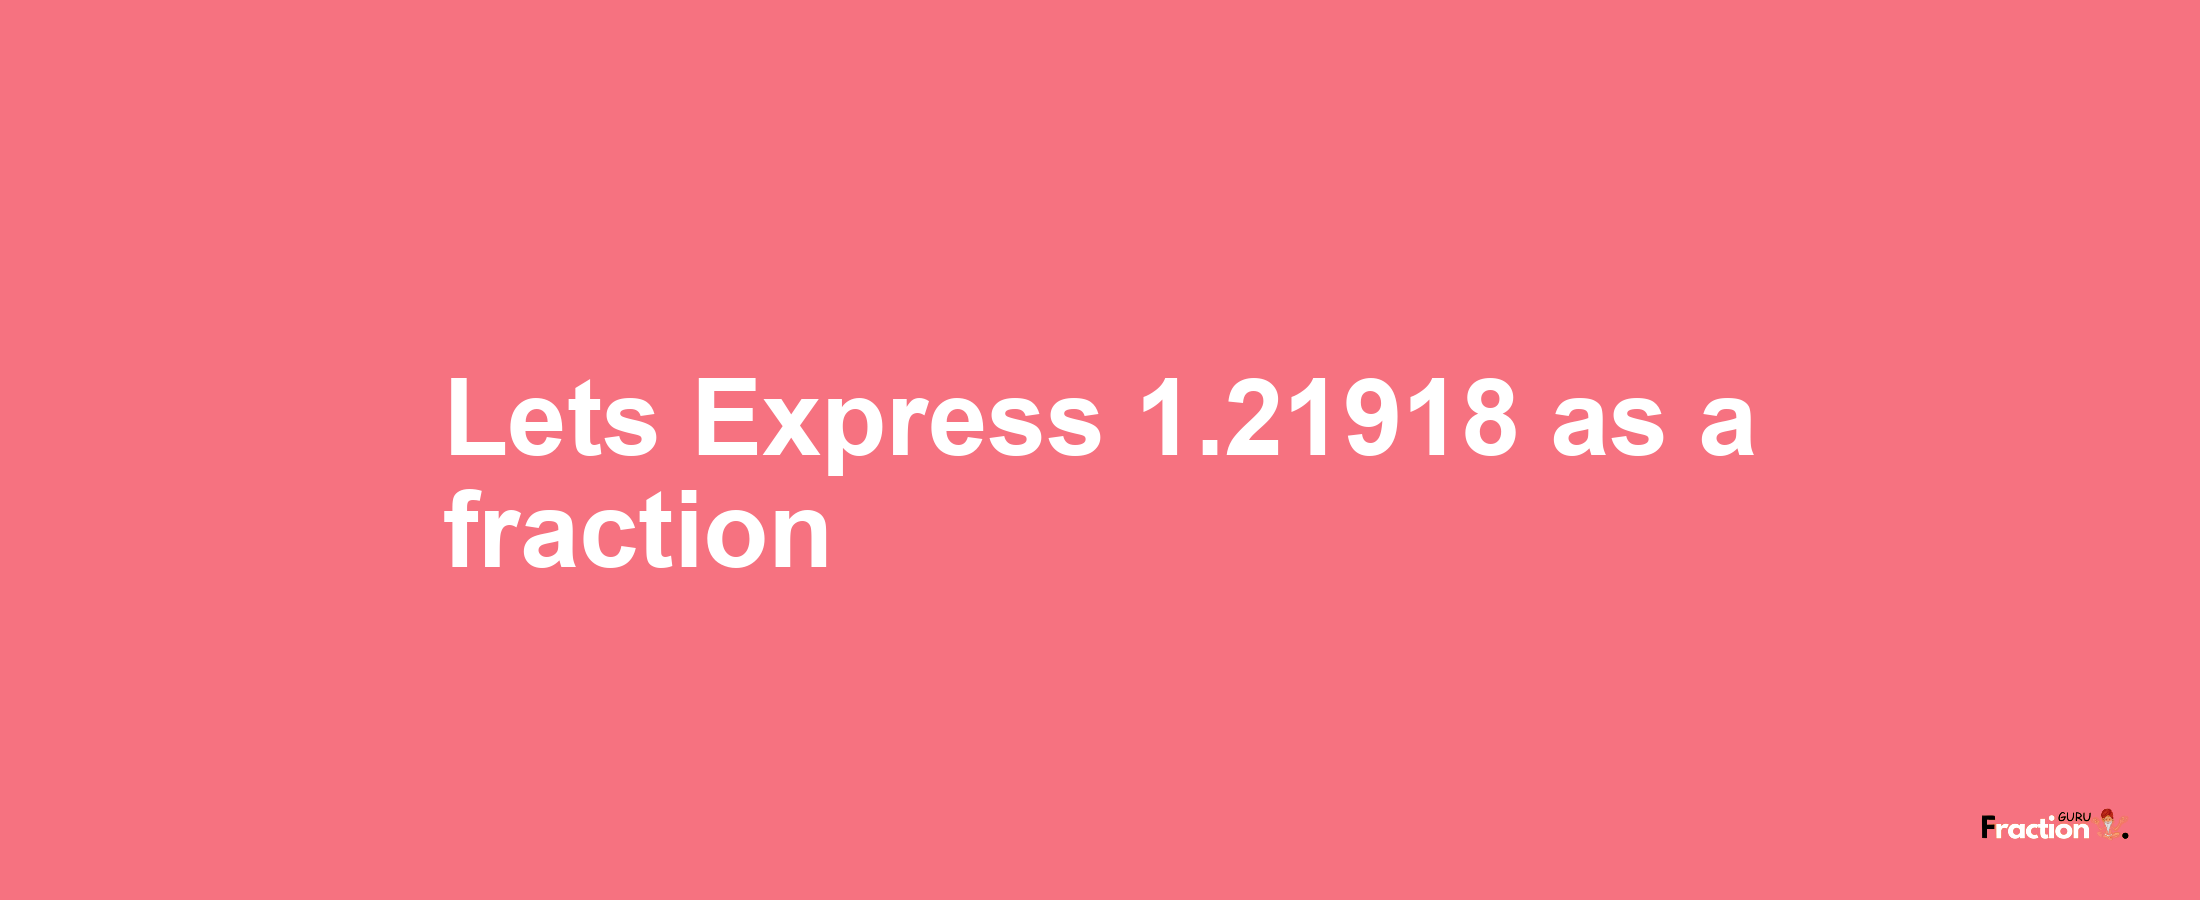 Lets Express 1.21918 as afraction